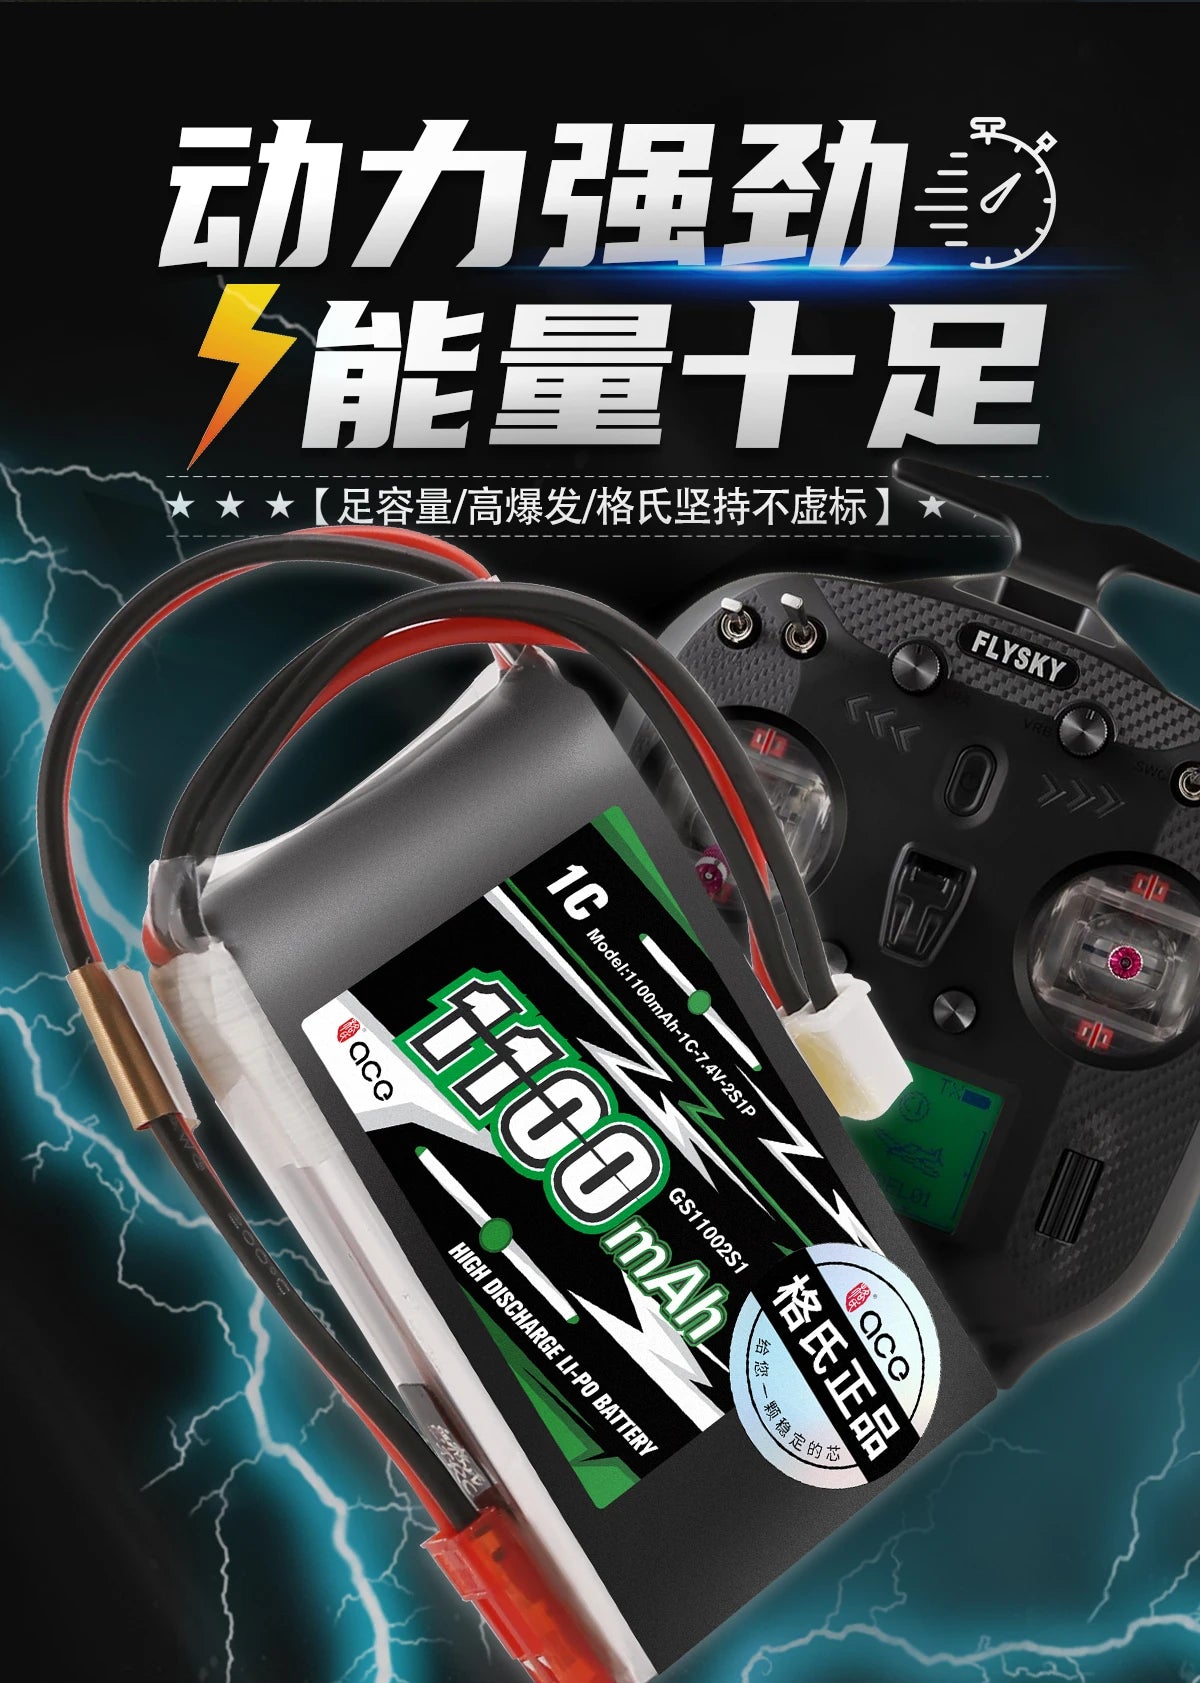 ACE Newly launched a Power Control, 1100mah 2S 1C